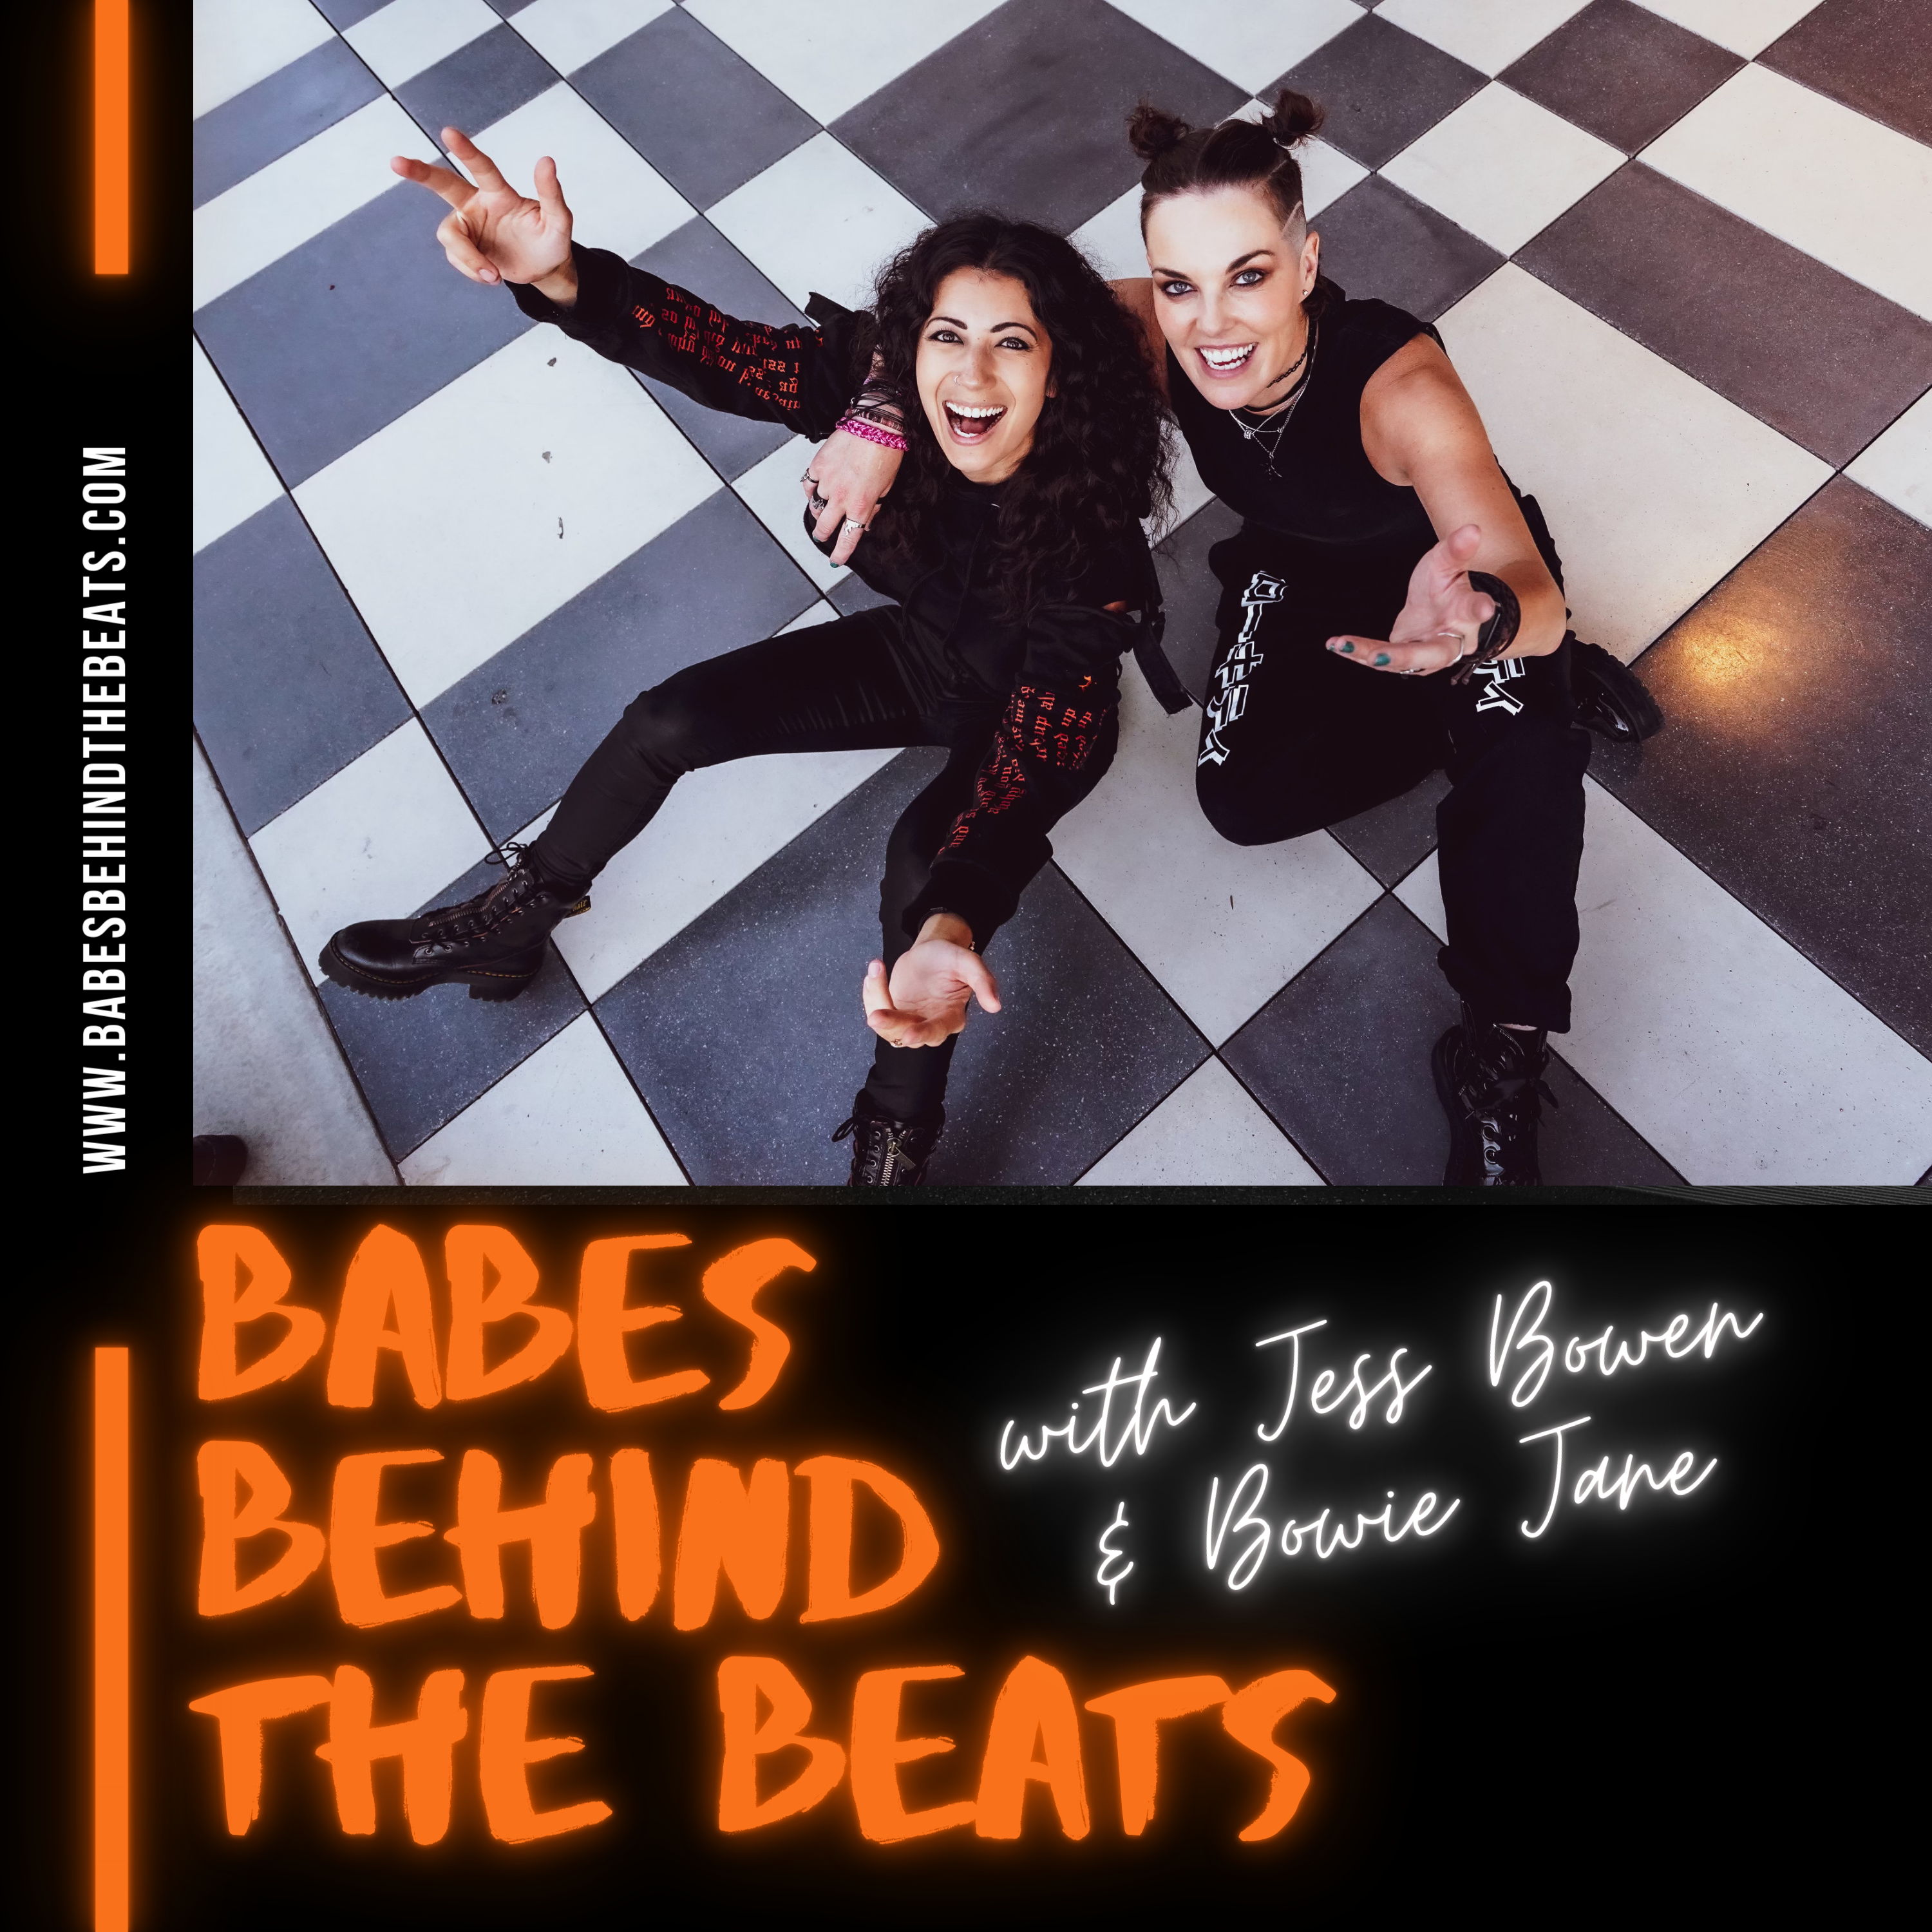 Babes Behind the Beats with Jess Bowen & Bowie Jane Podcast artwork